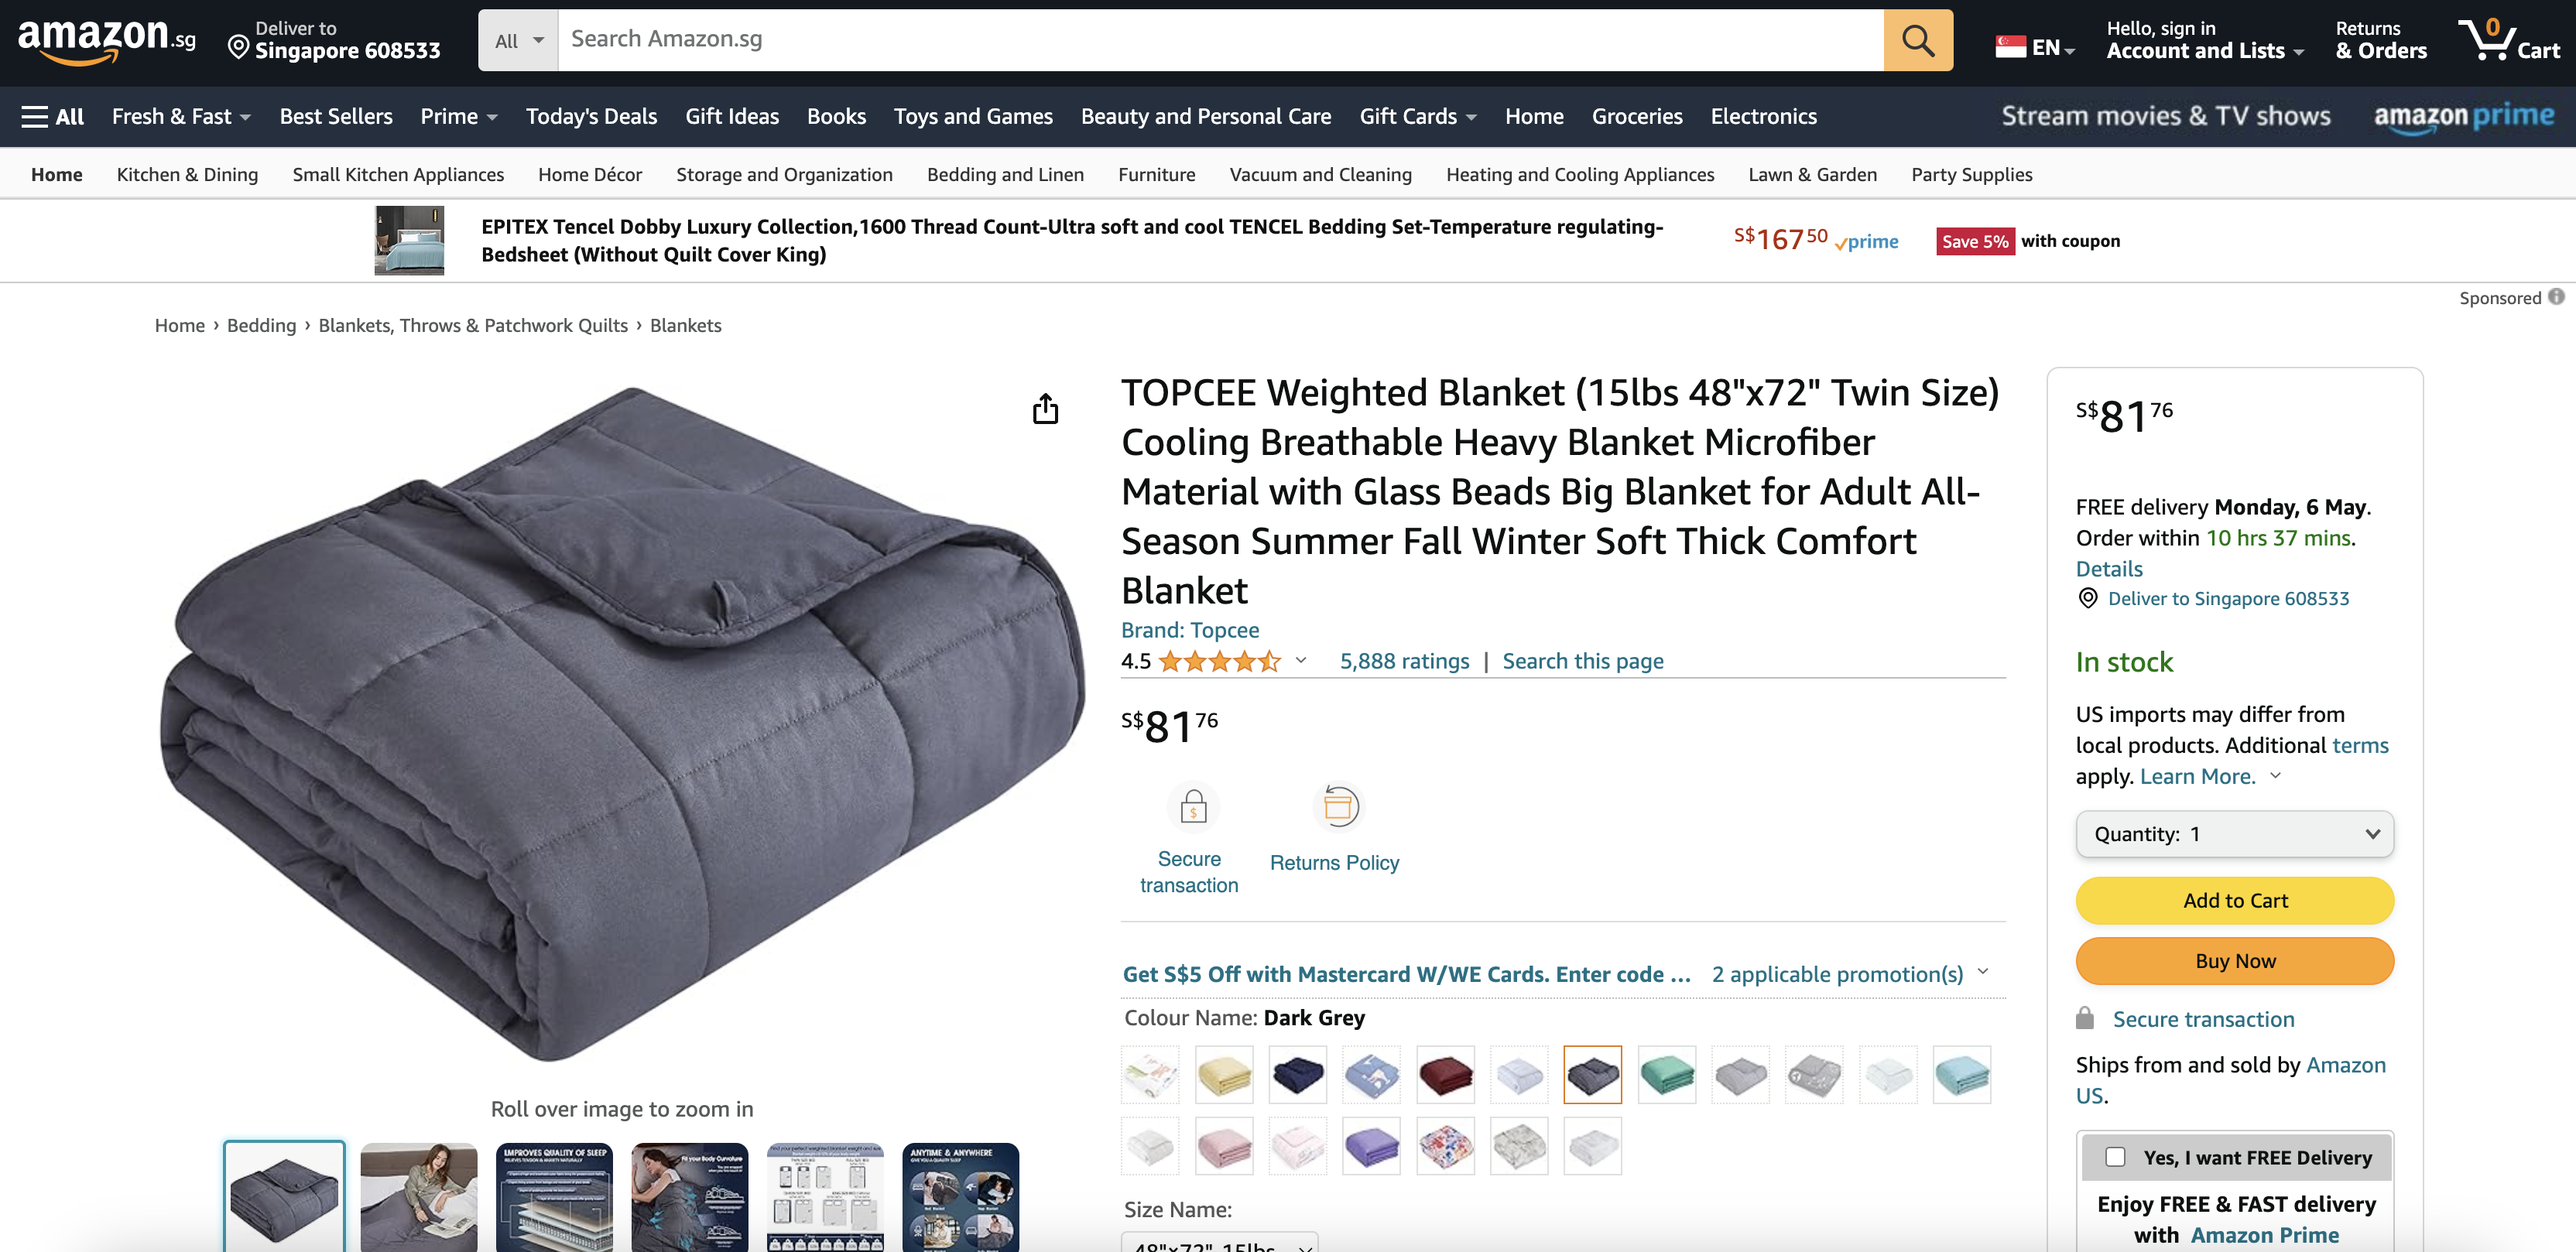 TOPCEE Weighted Blanket